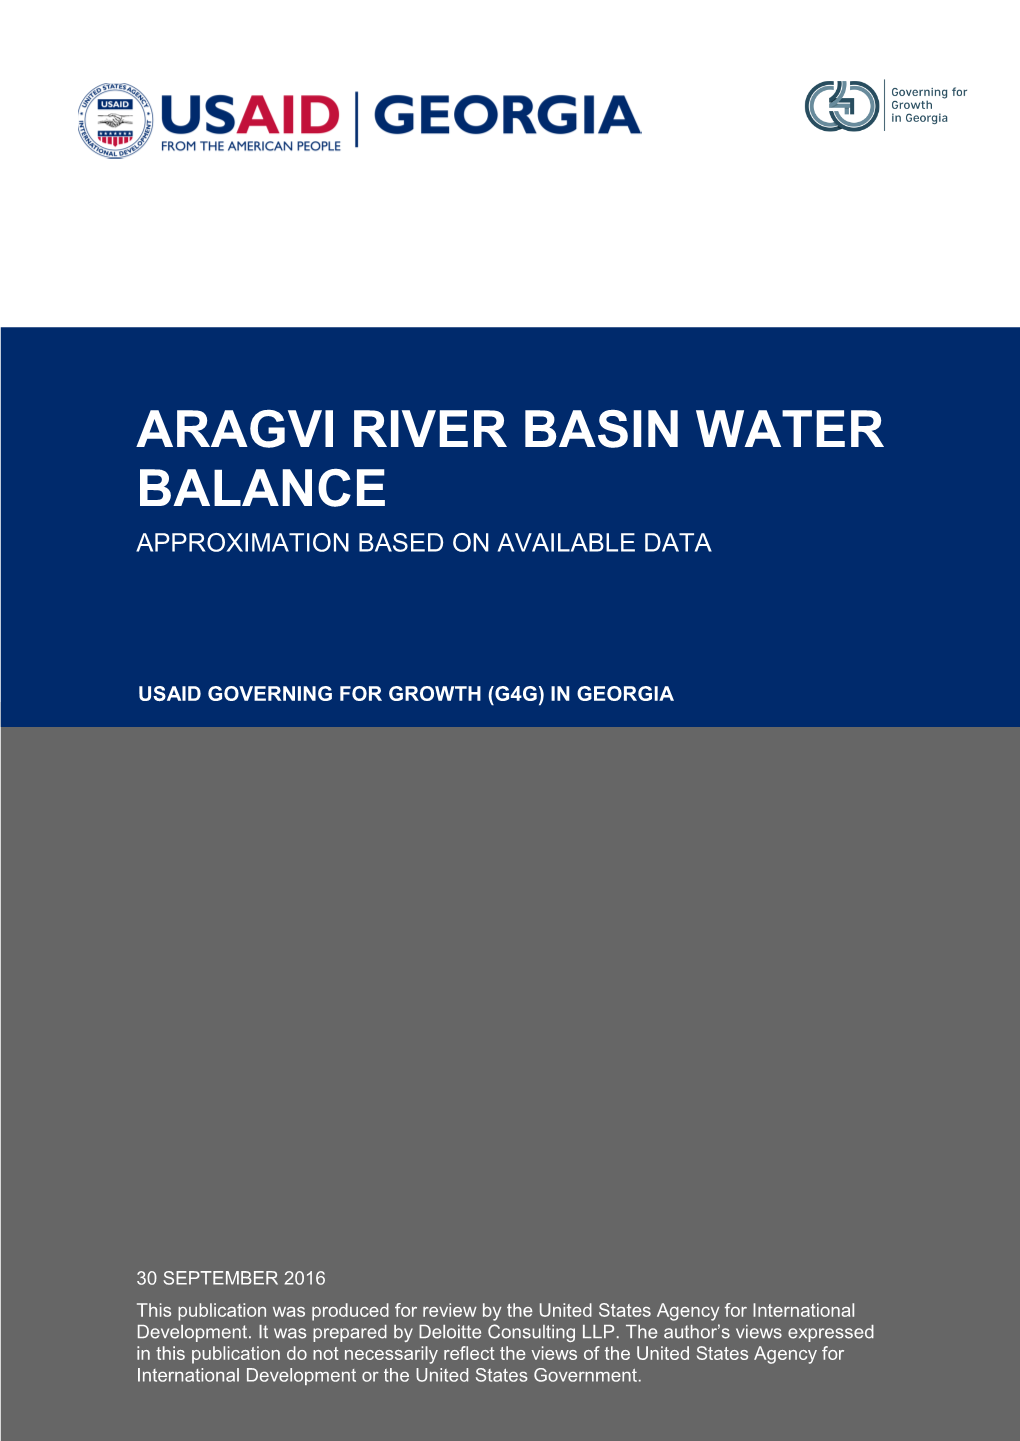 Aragvi River Basin Water Balance Approximation Based on Available Data